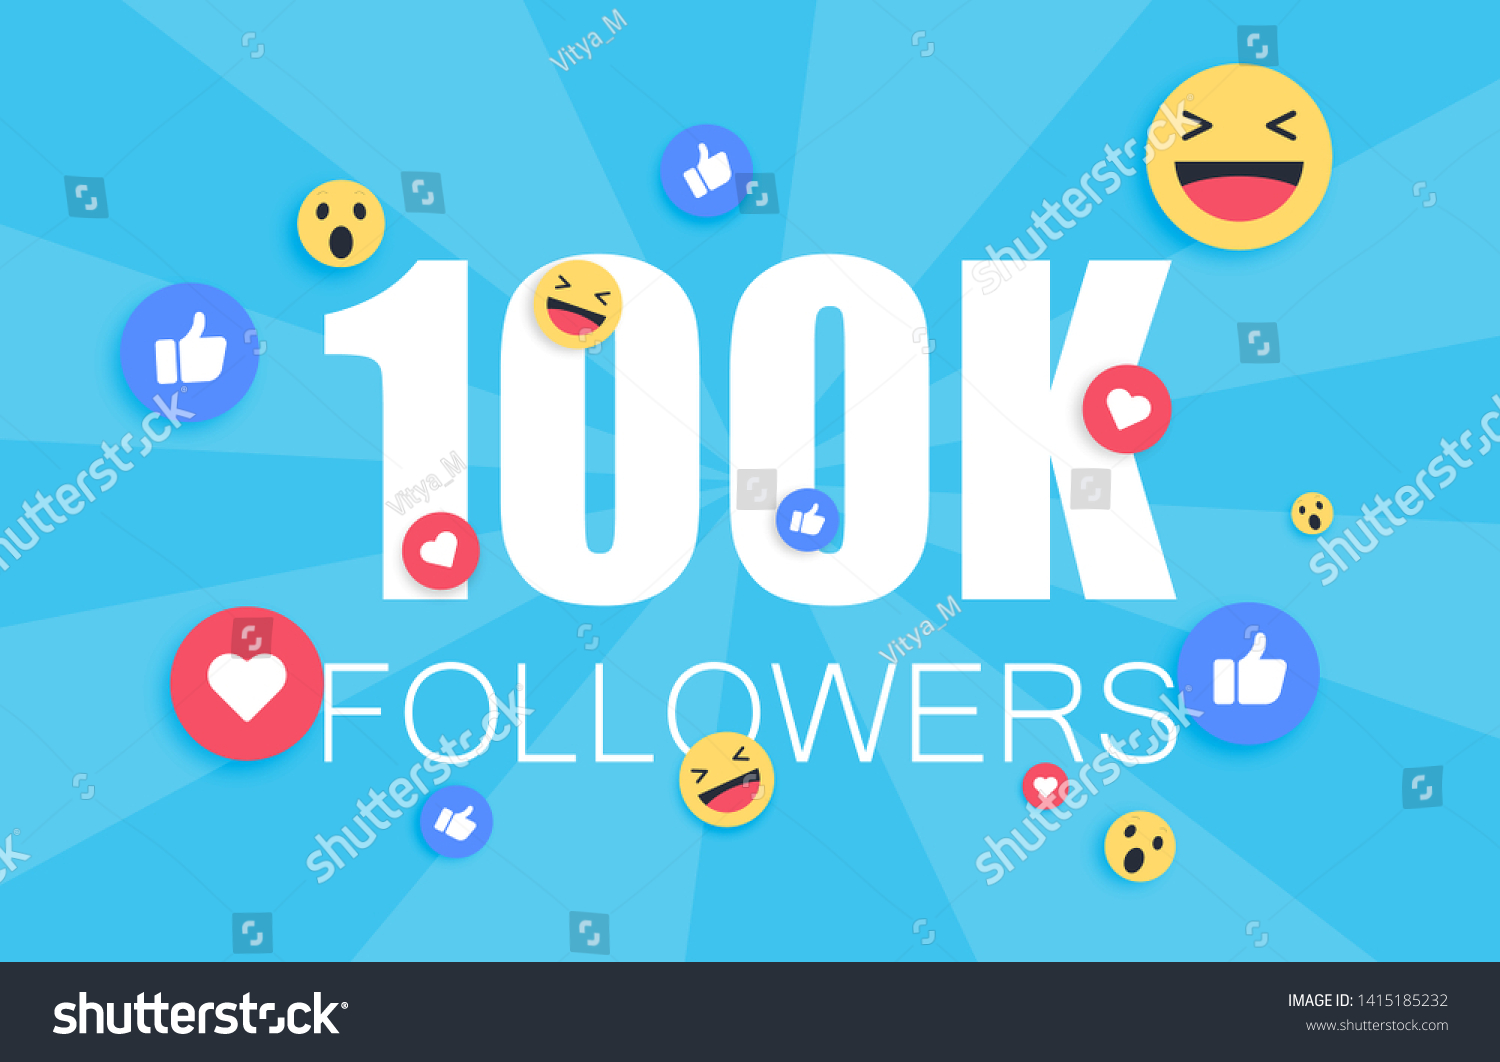 SVG of Thank you 100 000 followers background. Congratulating networking thanks, net friends abstract image, customers 100 000k sign. Isolated smiling people, like thumbs up, heart like. svg